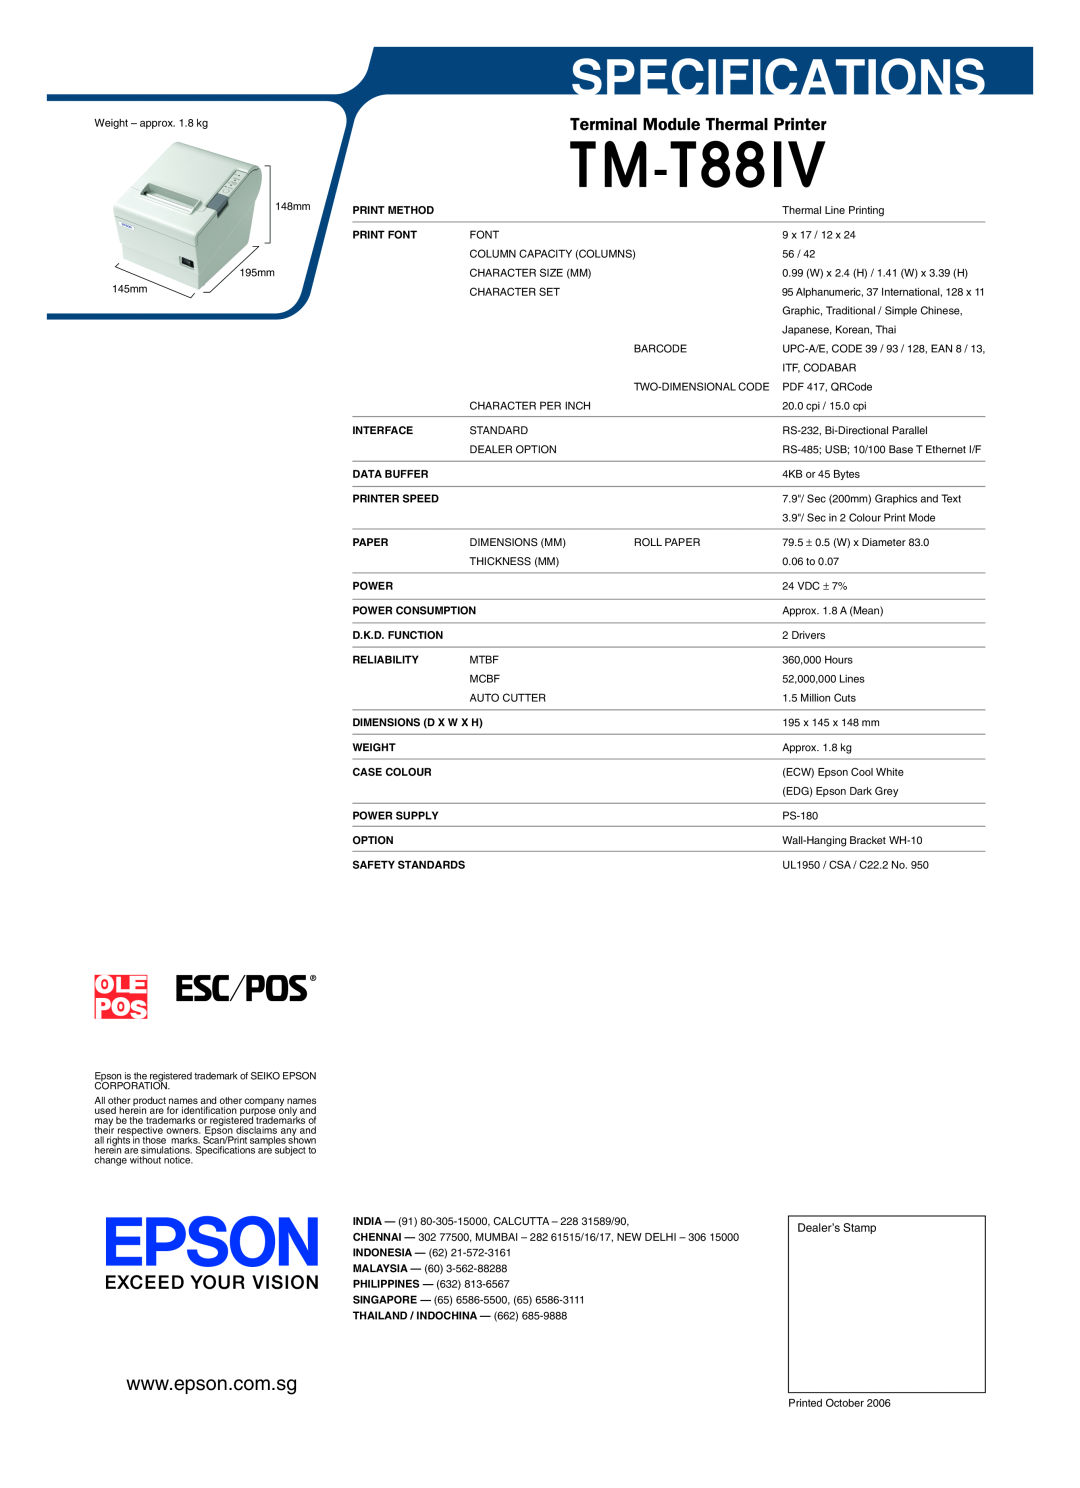 Epson TM-T88IV manual Specifications 